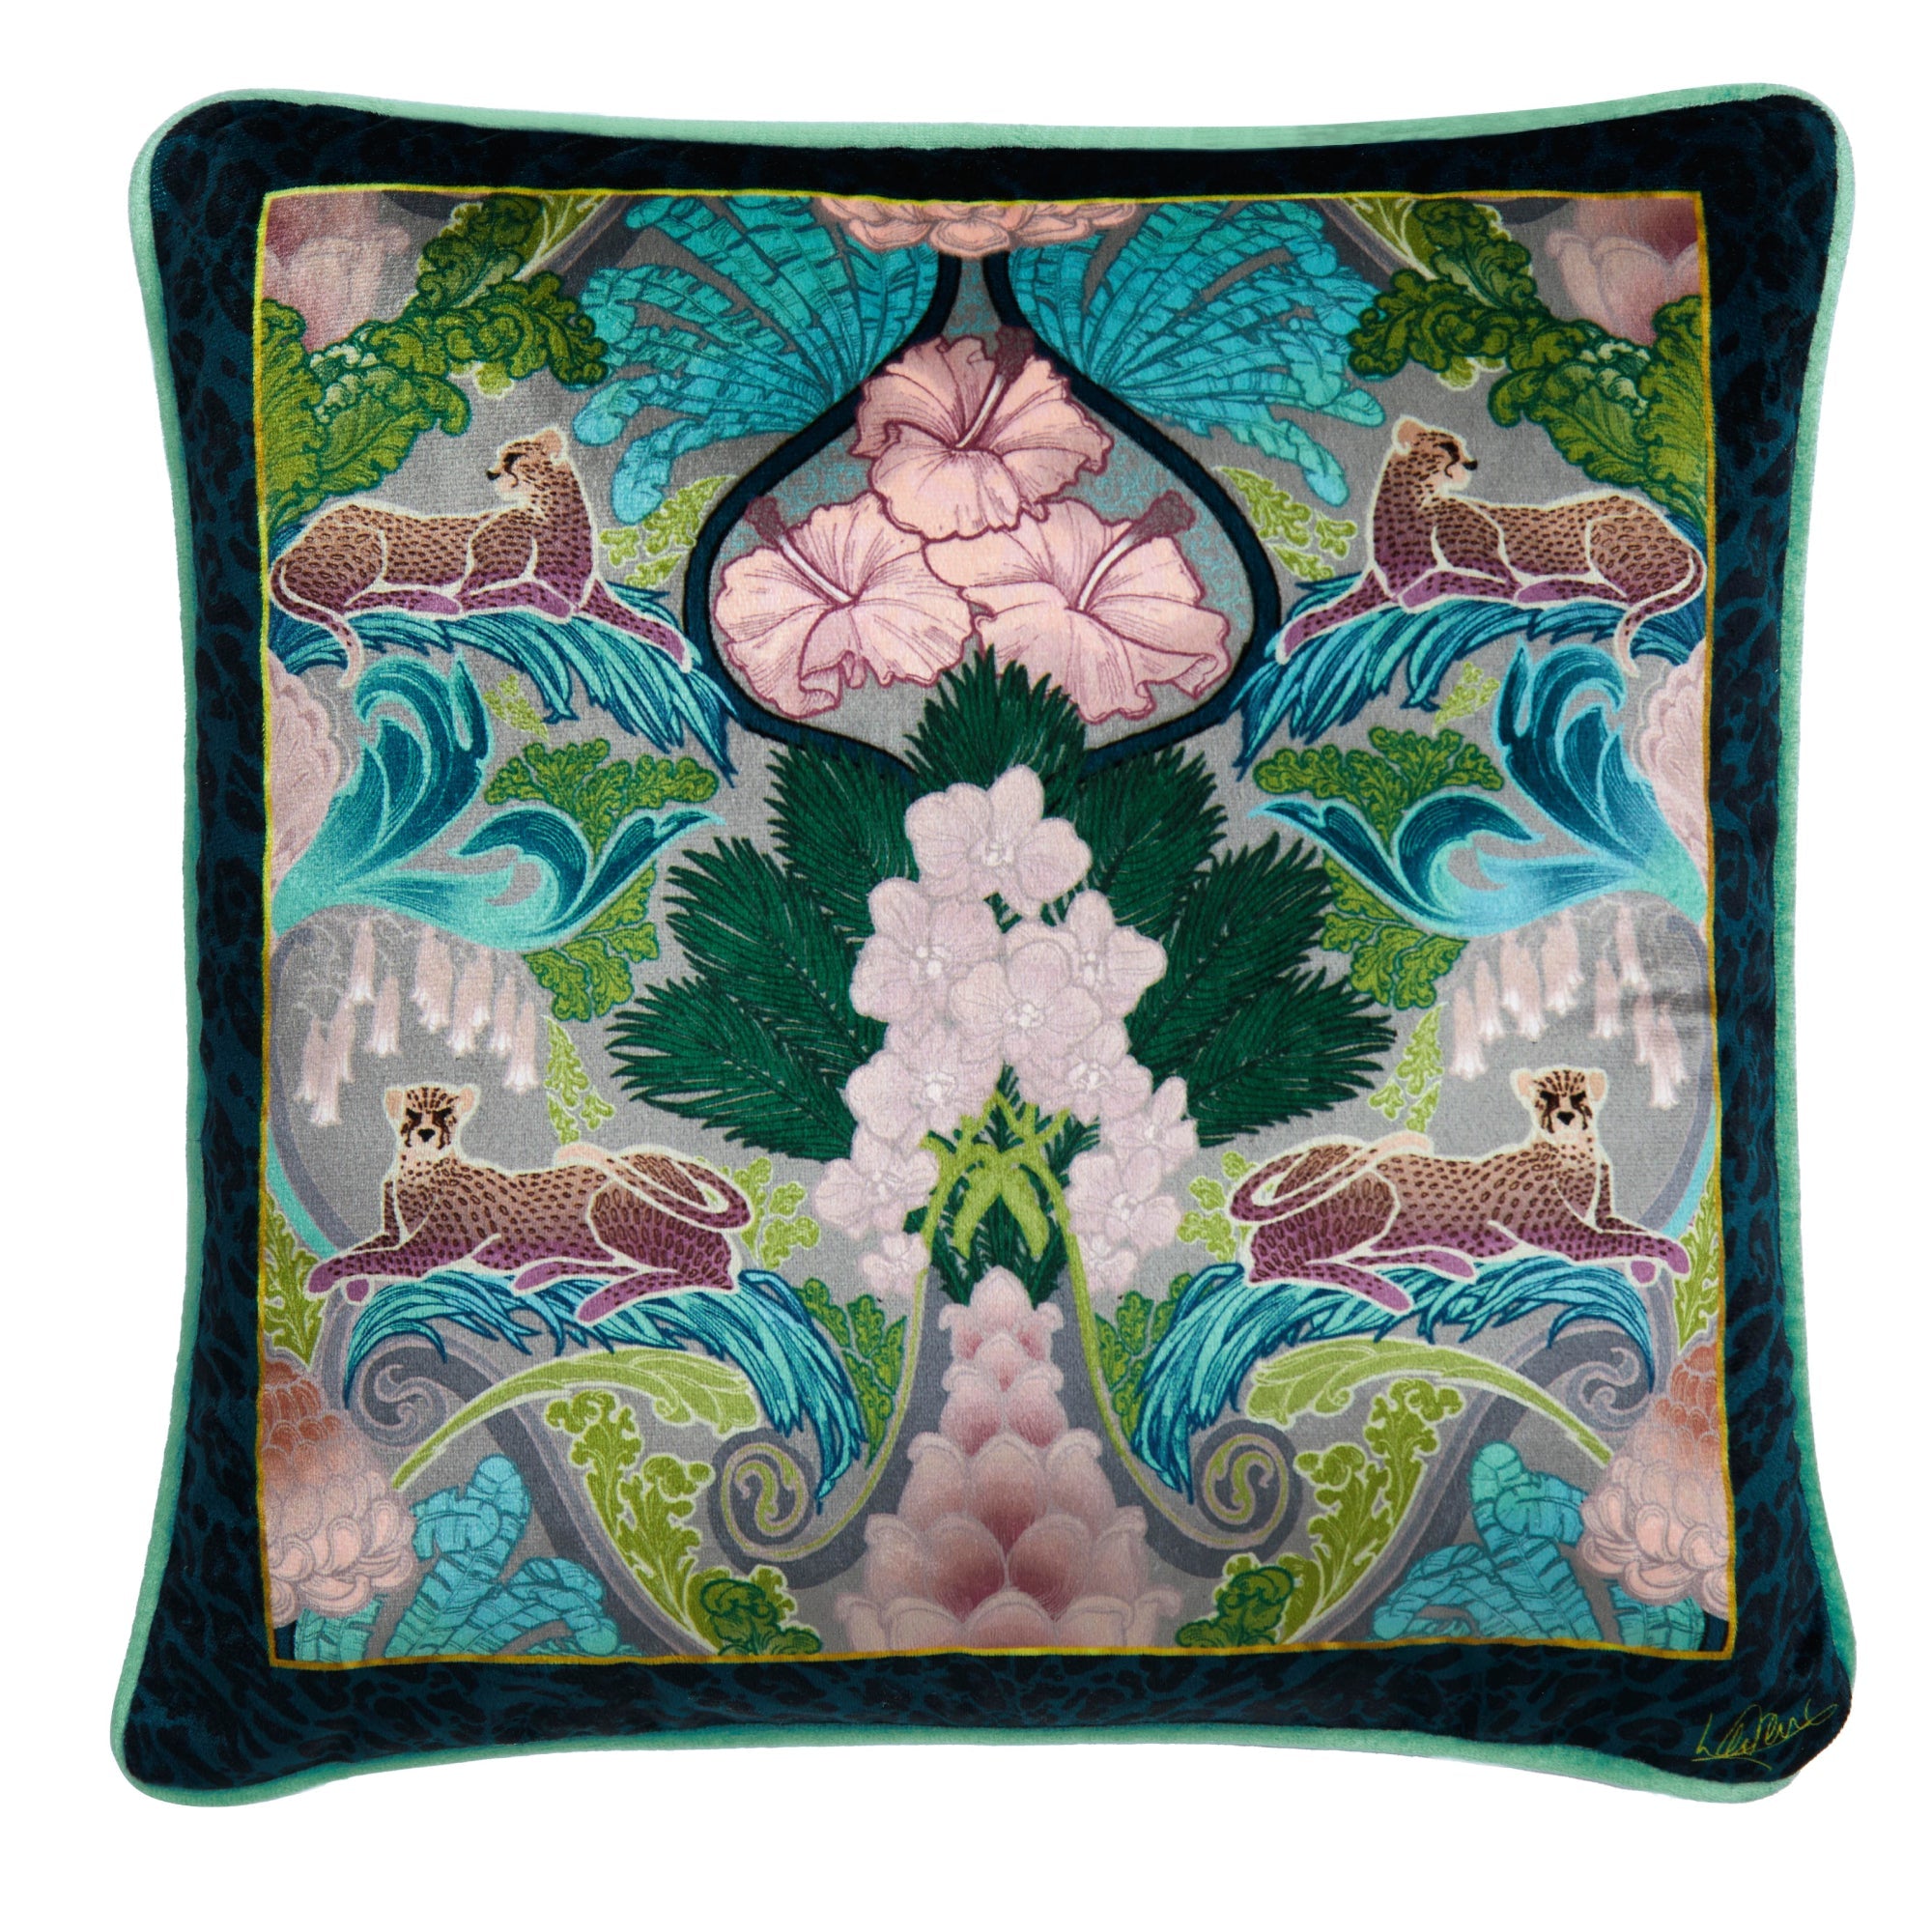 Suburban Jungle Filled Cushion by Laurence Llewelyn-Bowen in Teal 43 x 43cm - Filled Cushion - Laurence Llewelyn-Bowen